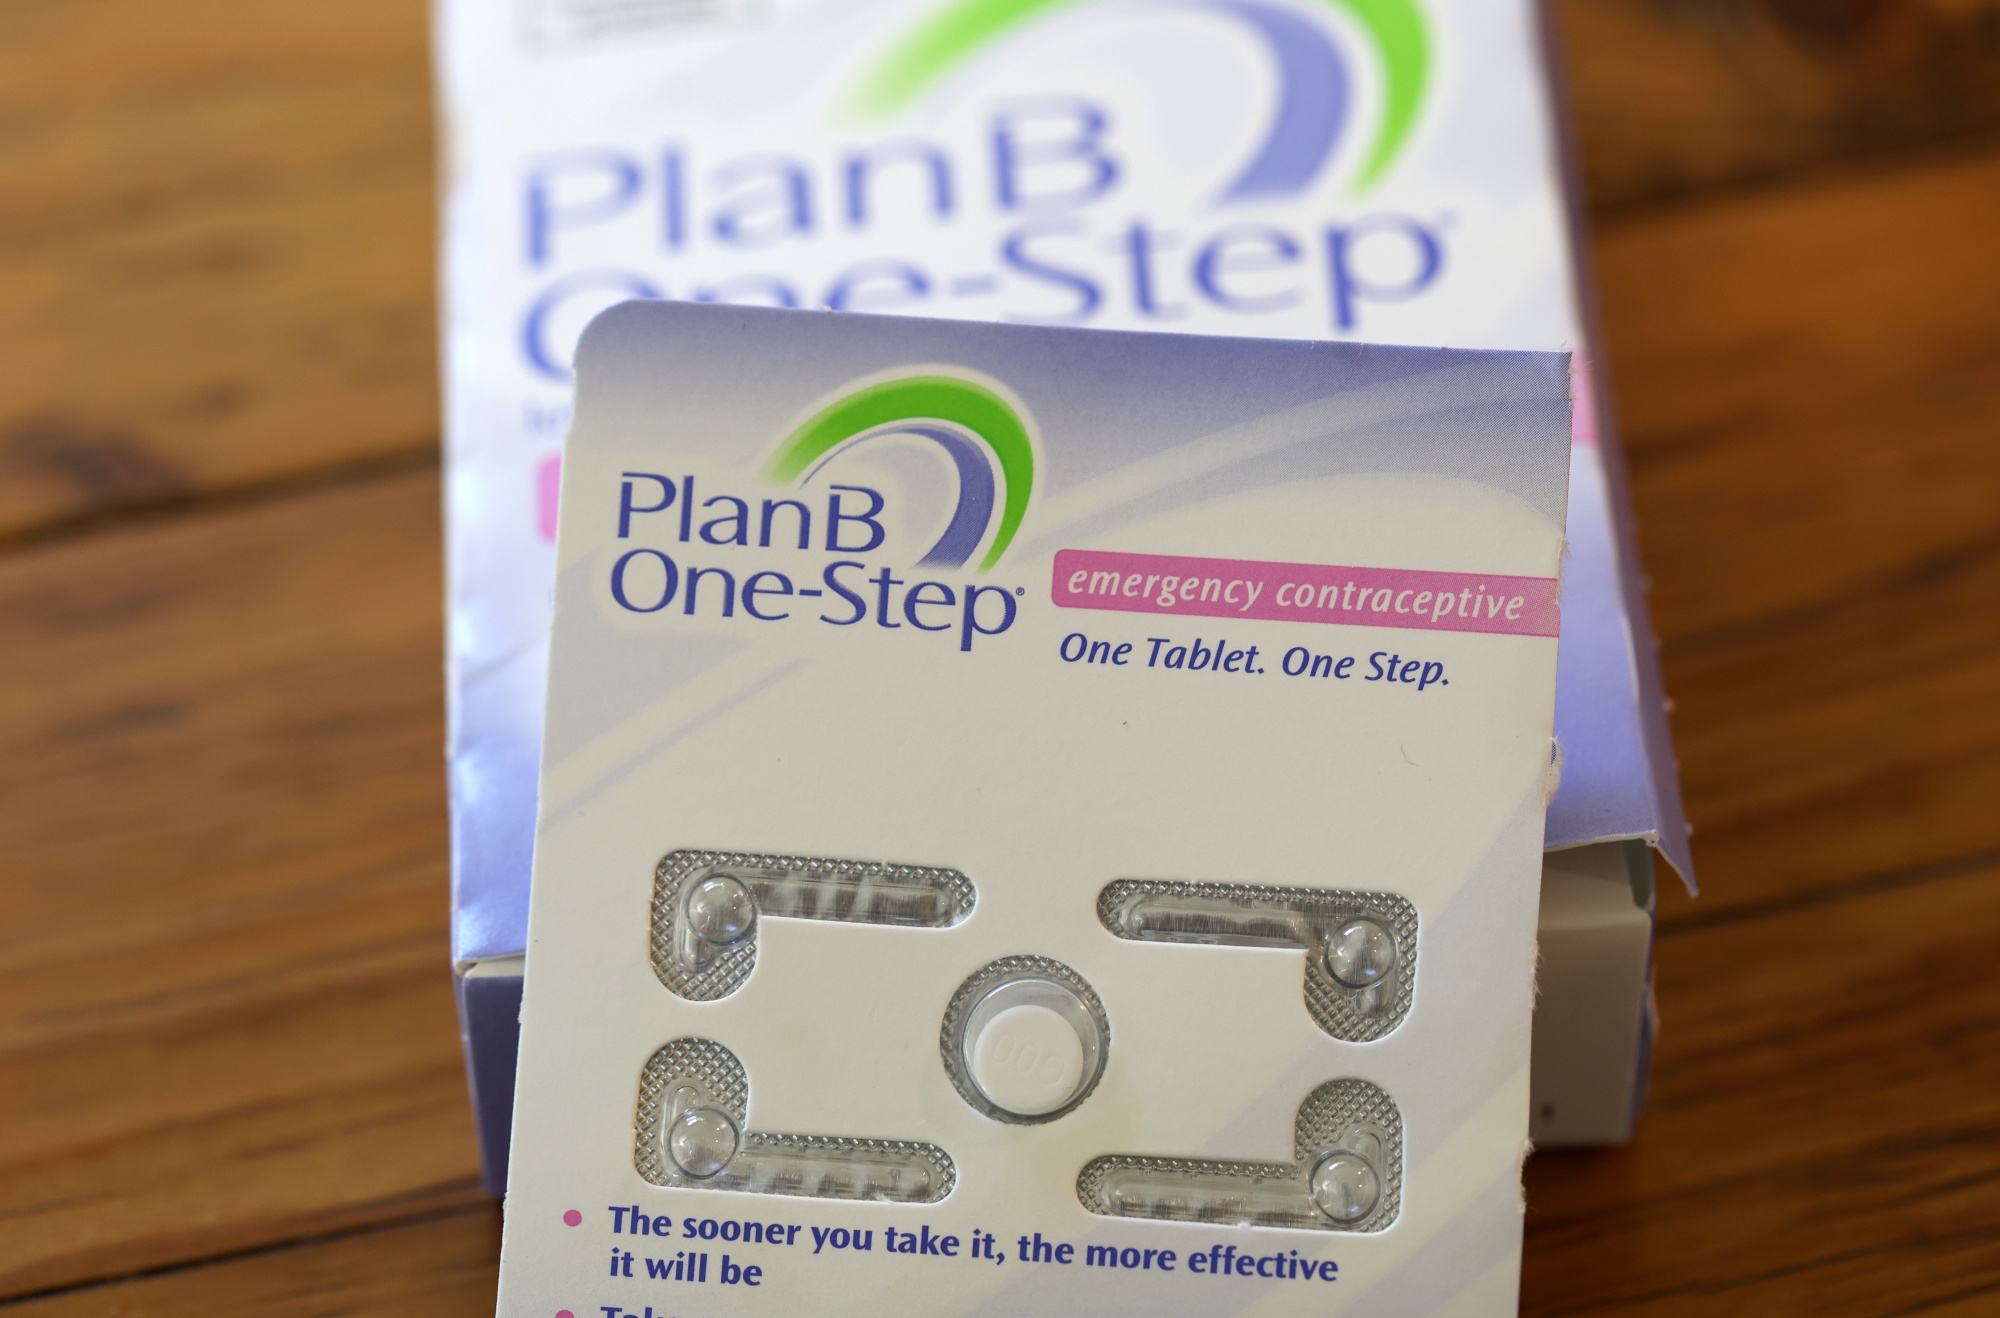 Plan B, birth control and emergency contraception in Texas: How to